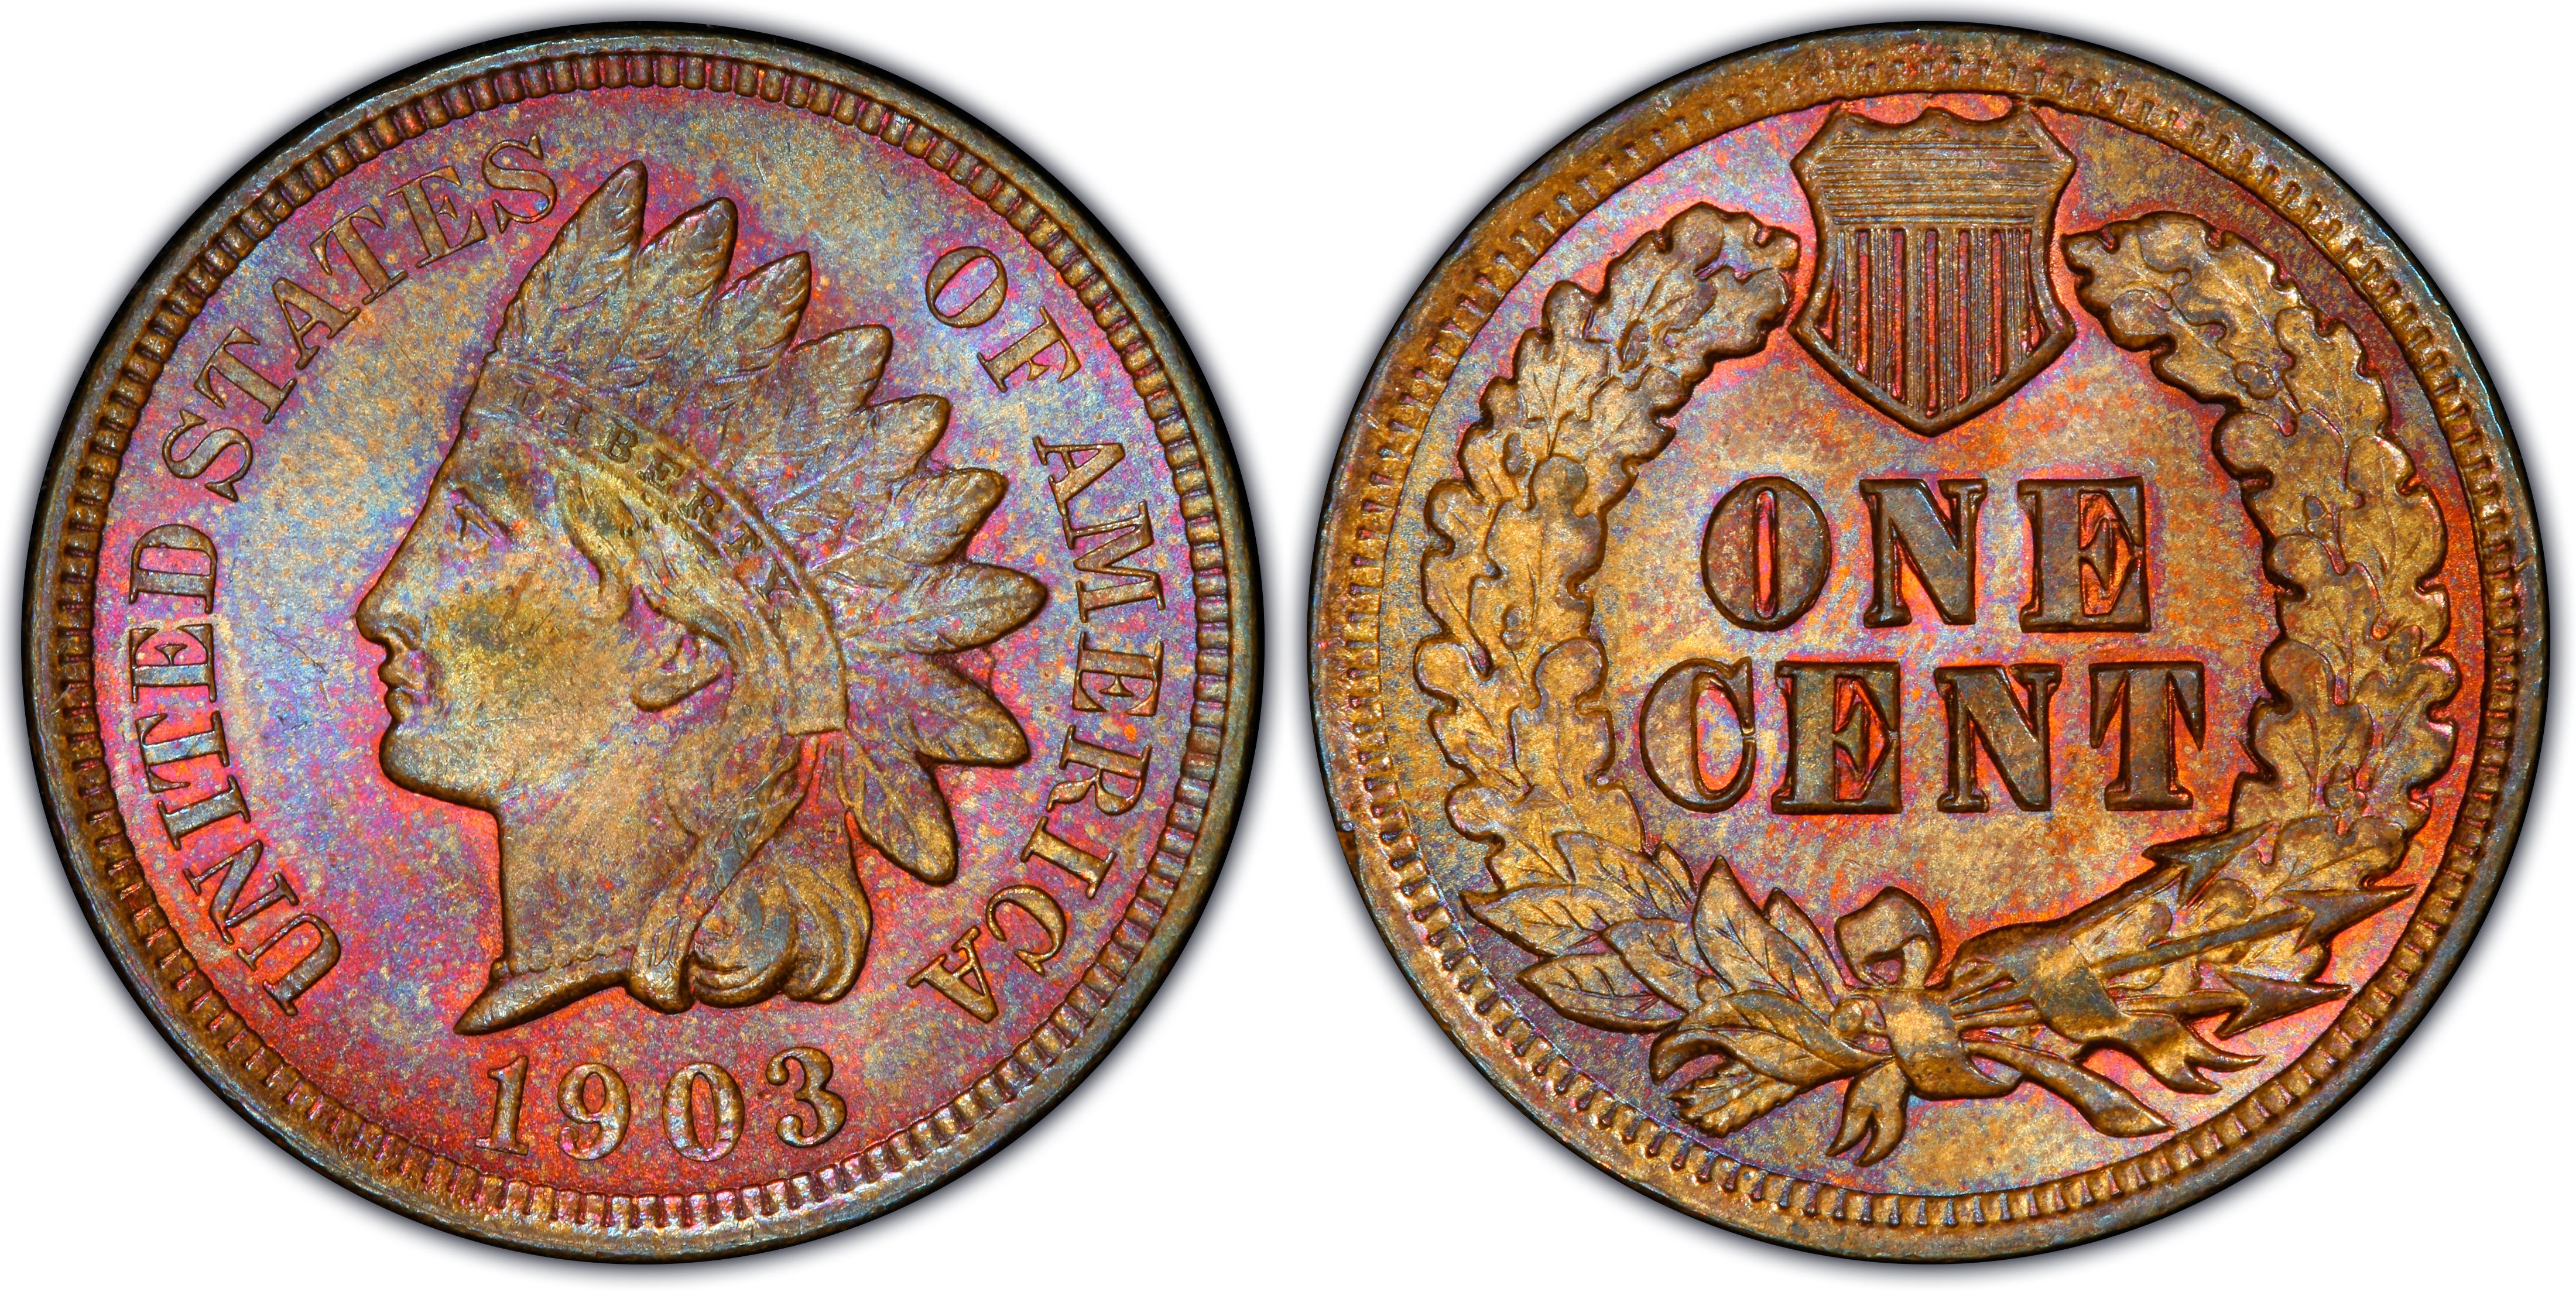 1903 1C, BN (Regular Strike) Indian Cent - PCGS CoinFacts